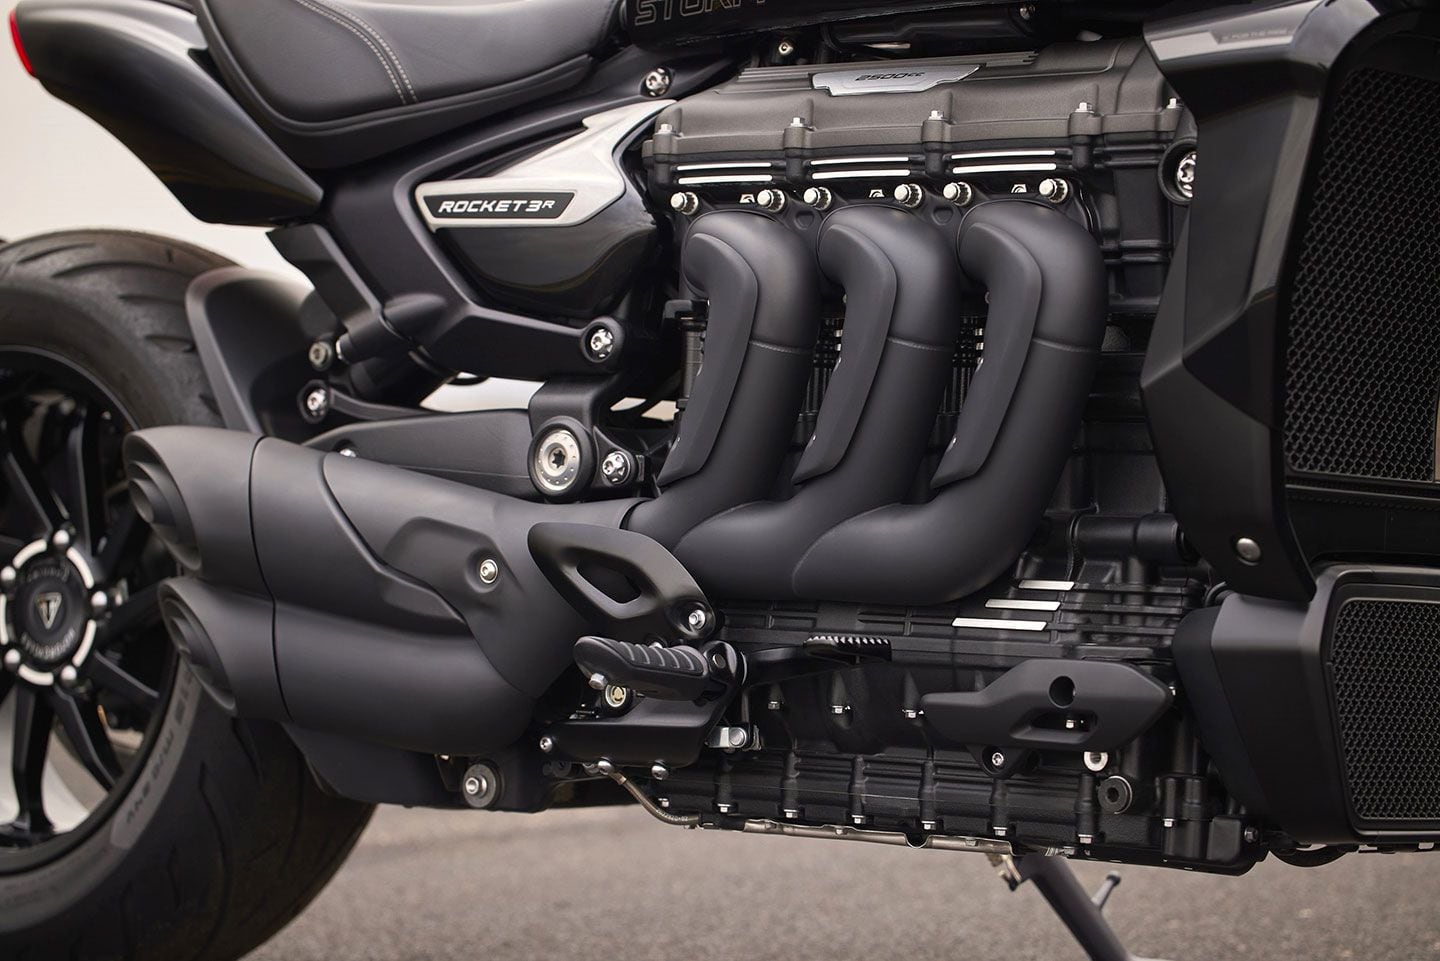 The 2,458cc inline-triple engine is mostly unchanged, but Triumph has managed to massage it to output 180 hp and 166 lb.-ft. of torque.